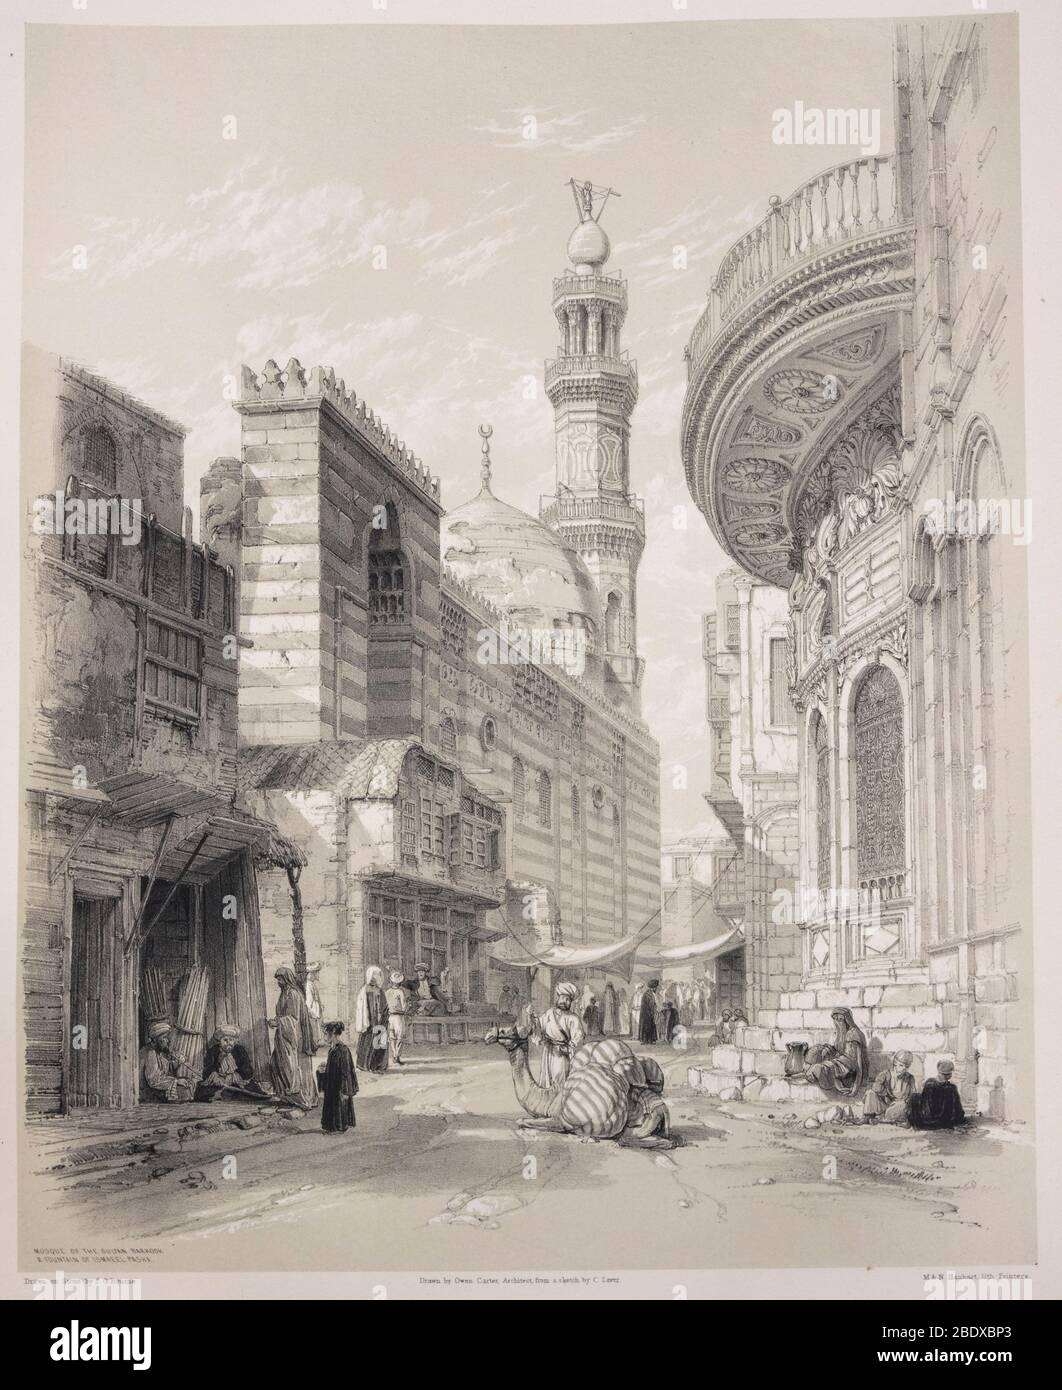 Mosque of the Sultan Barkook and fountain of Ismaeel pasha, Robert Hay, Illustrations of Cairo, London, 1840 Stock Photo